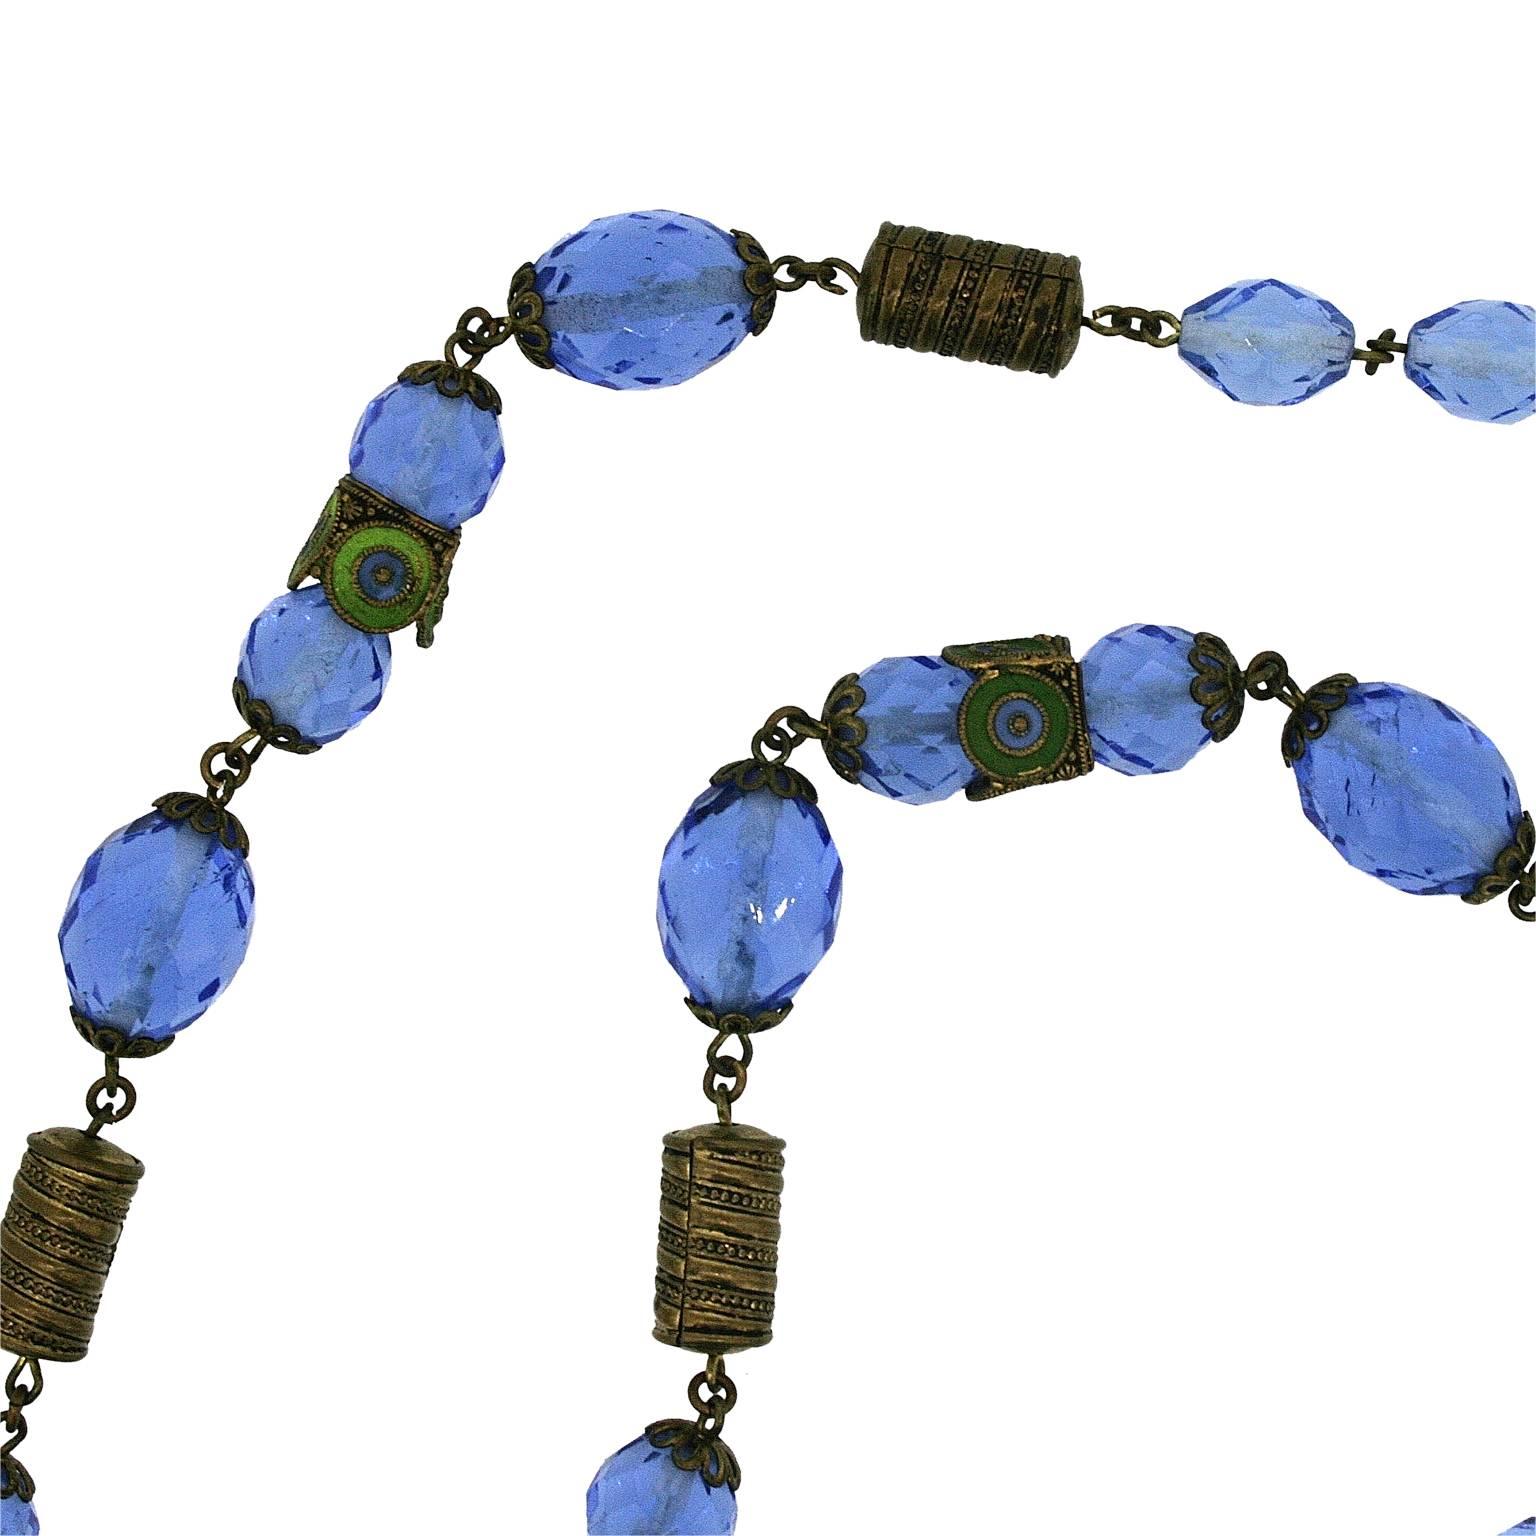 This beautiful necklace was created by the Neiger Brothers in Czechoslovakia in the 1920s. 
Condition Report:
Very Good - One enamelled cap is slightly mis-shapen. This is consistent with age and use, only visible upon very close inspection and does